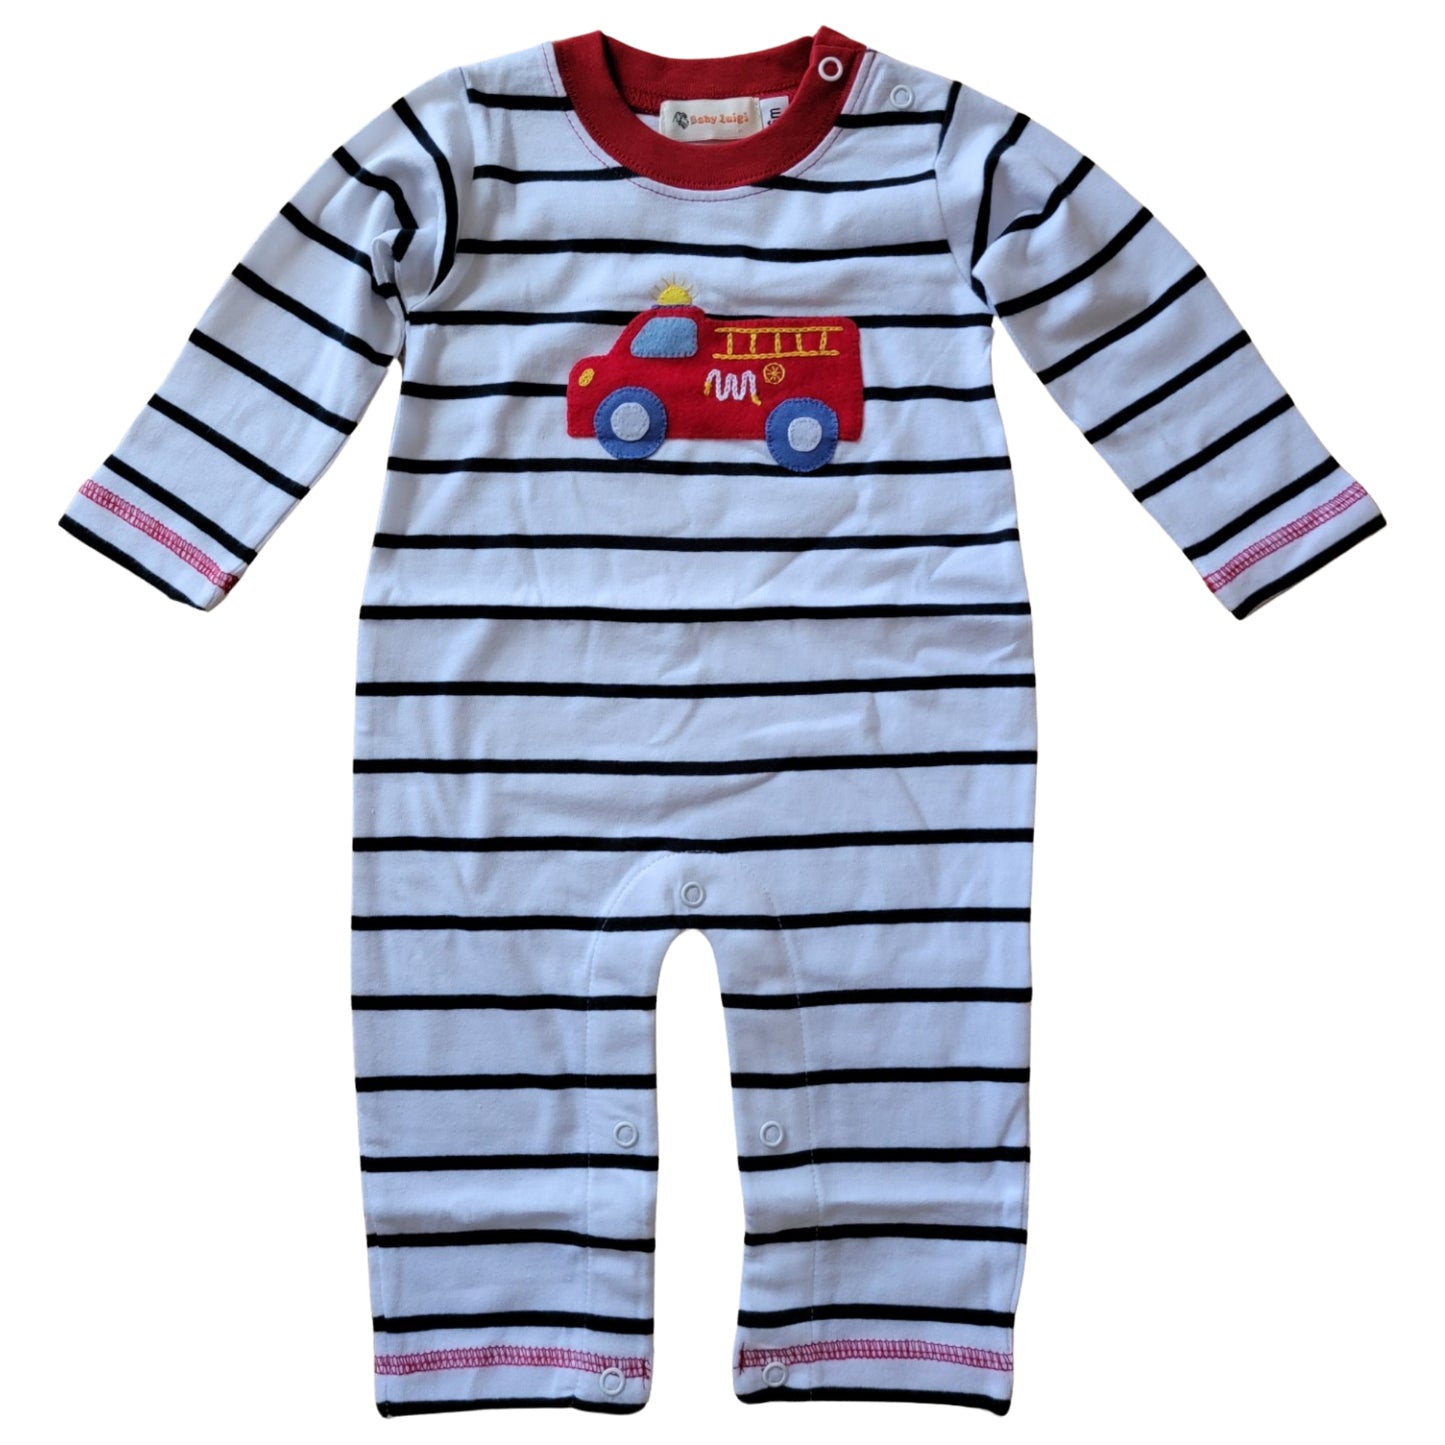 Boy's Long Sleeve Stripe Playsuit with Fire Truck